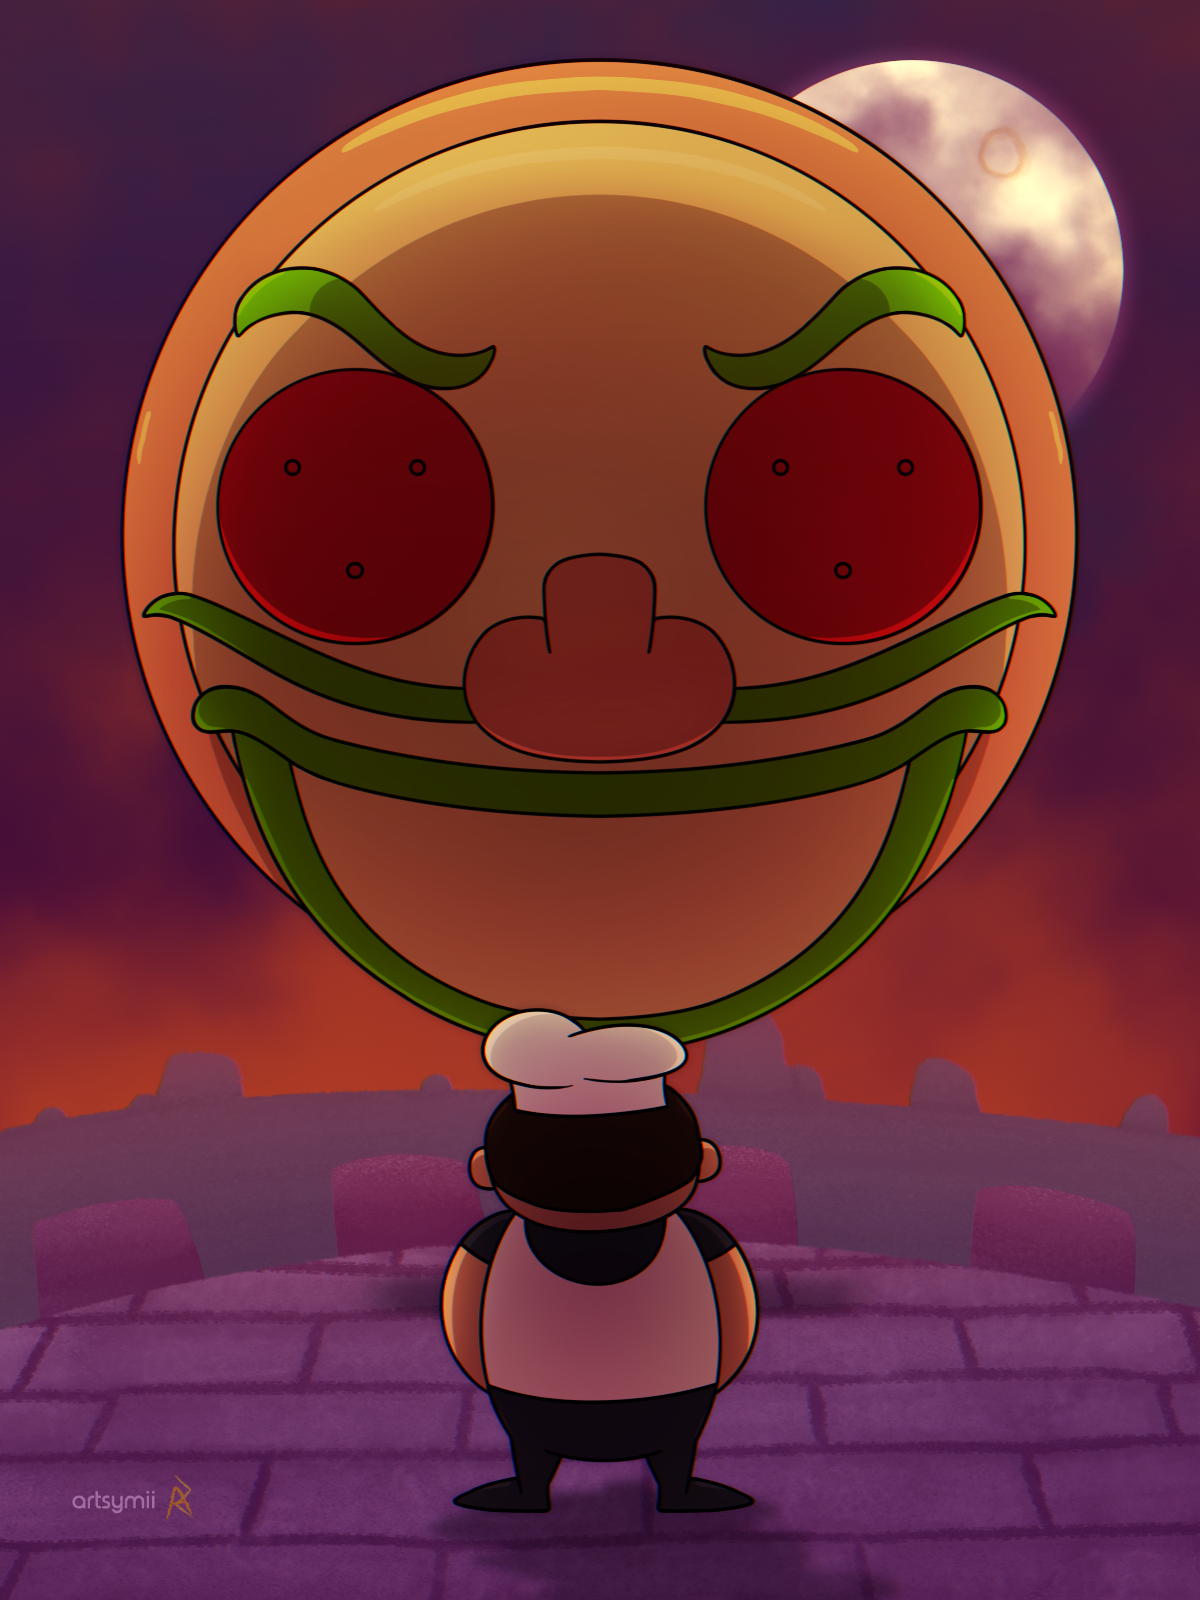 Peppino from Pizza Tower by rabbidlover01 on DeviantArt